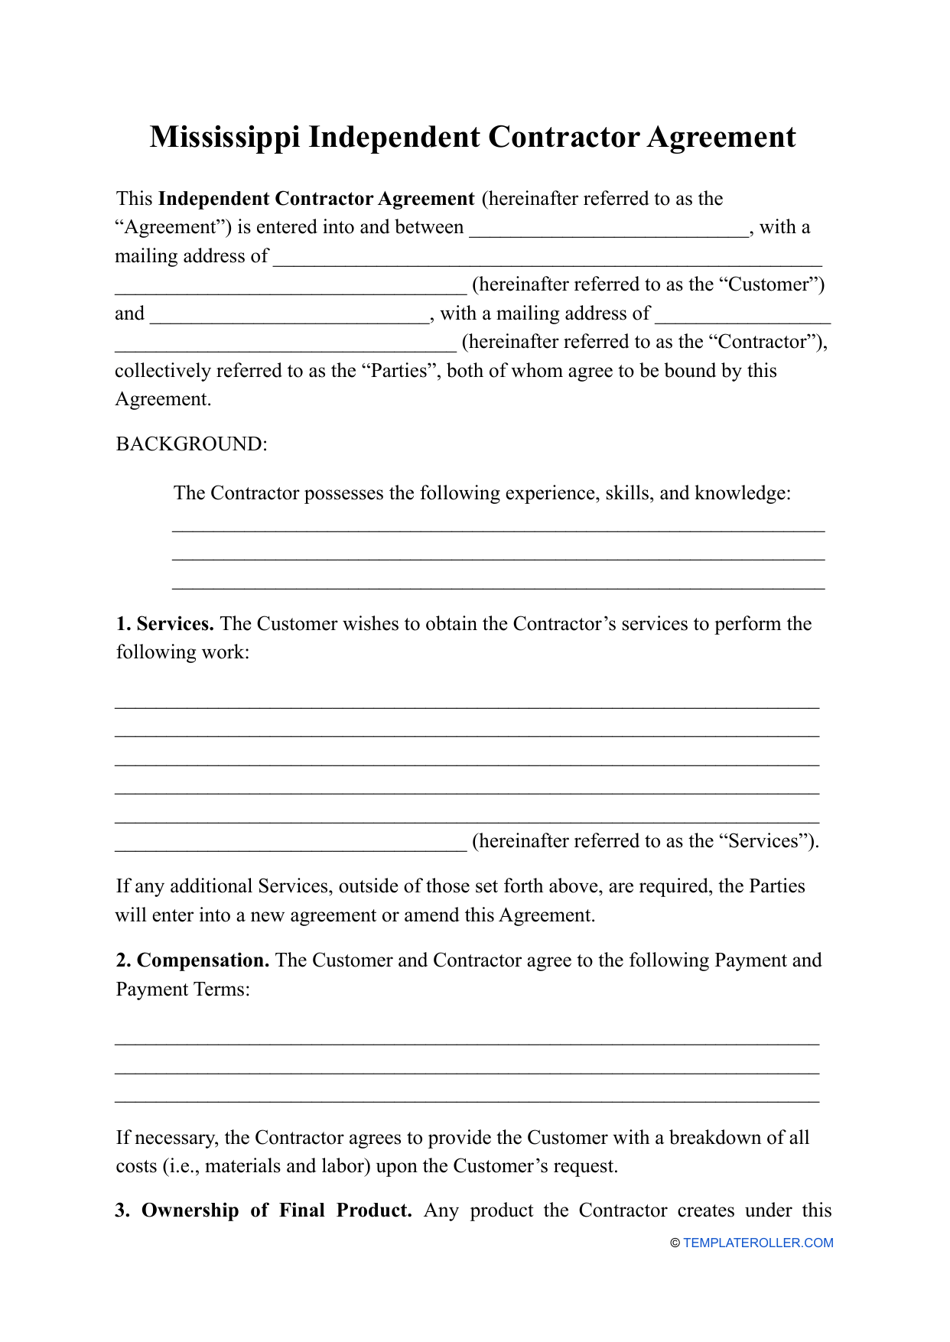 Independent Contractor Agreement Template - Mississippi, Page 1